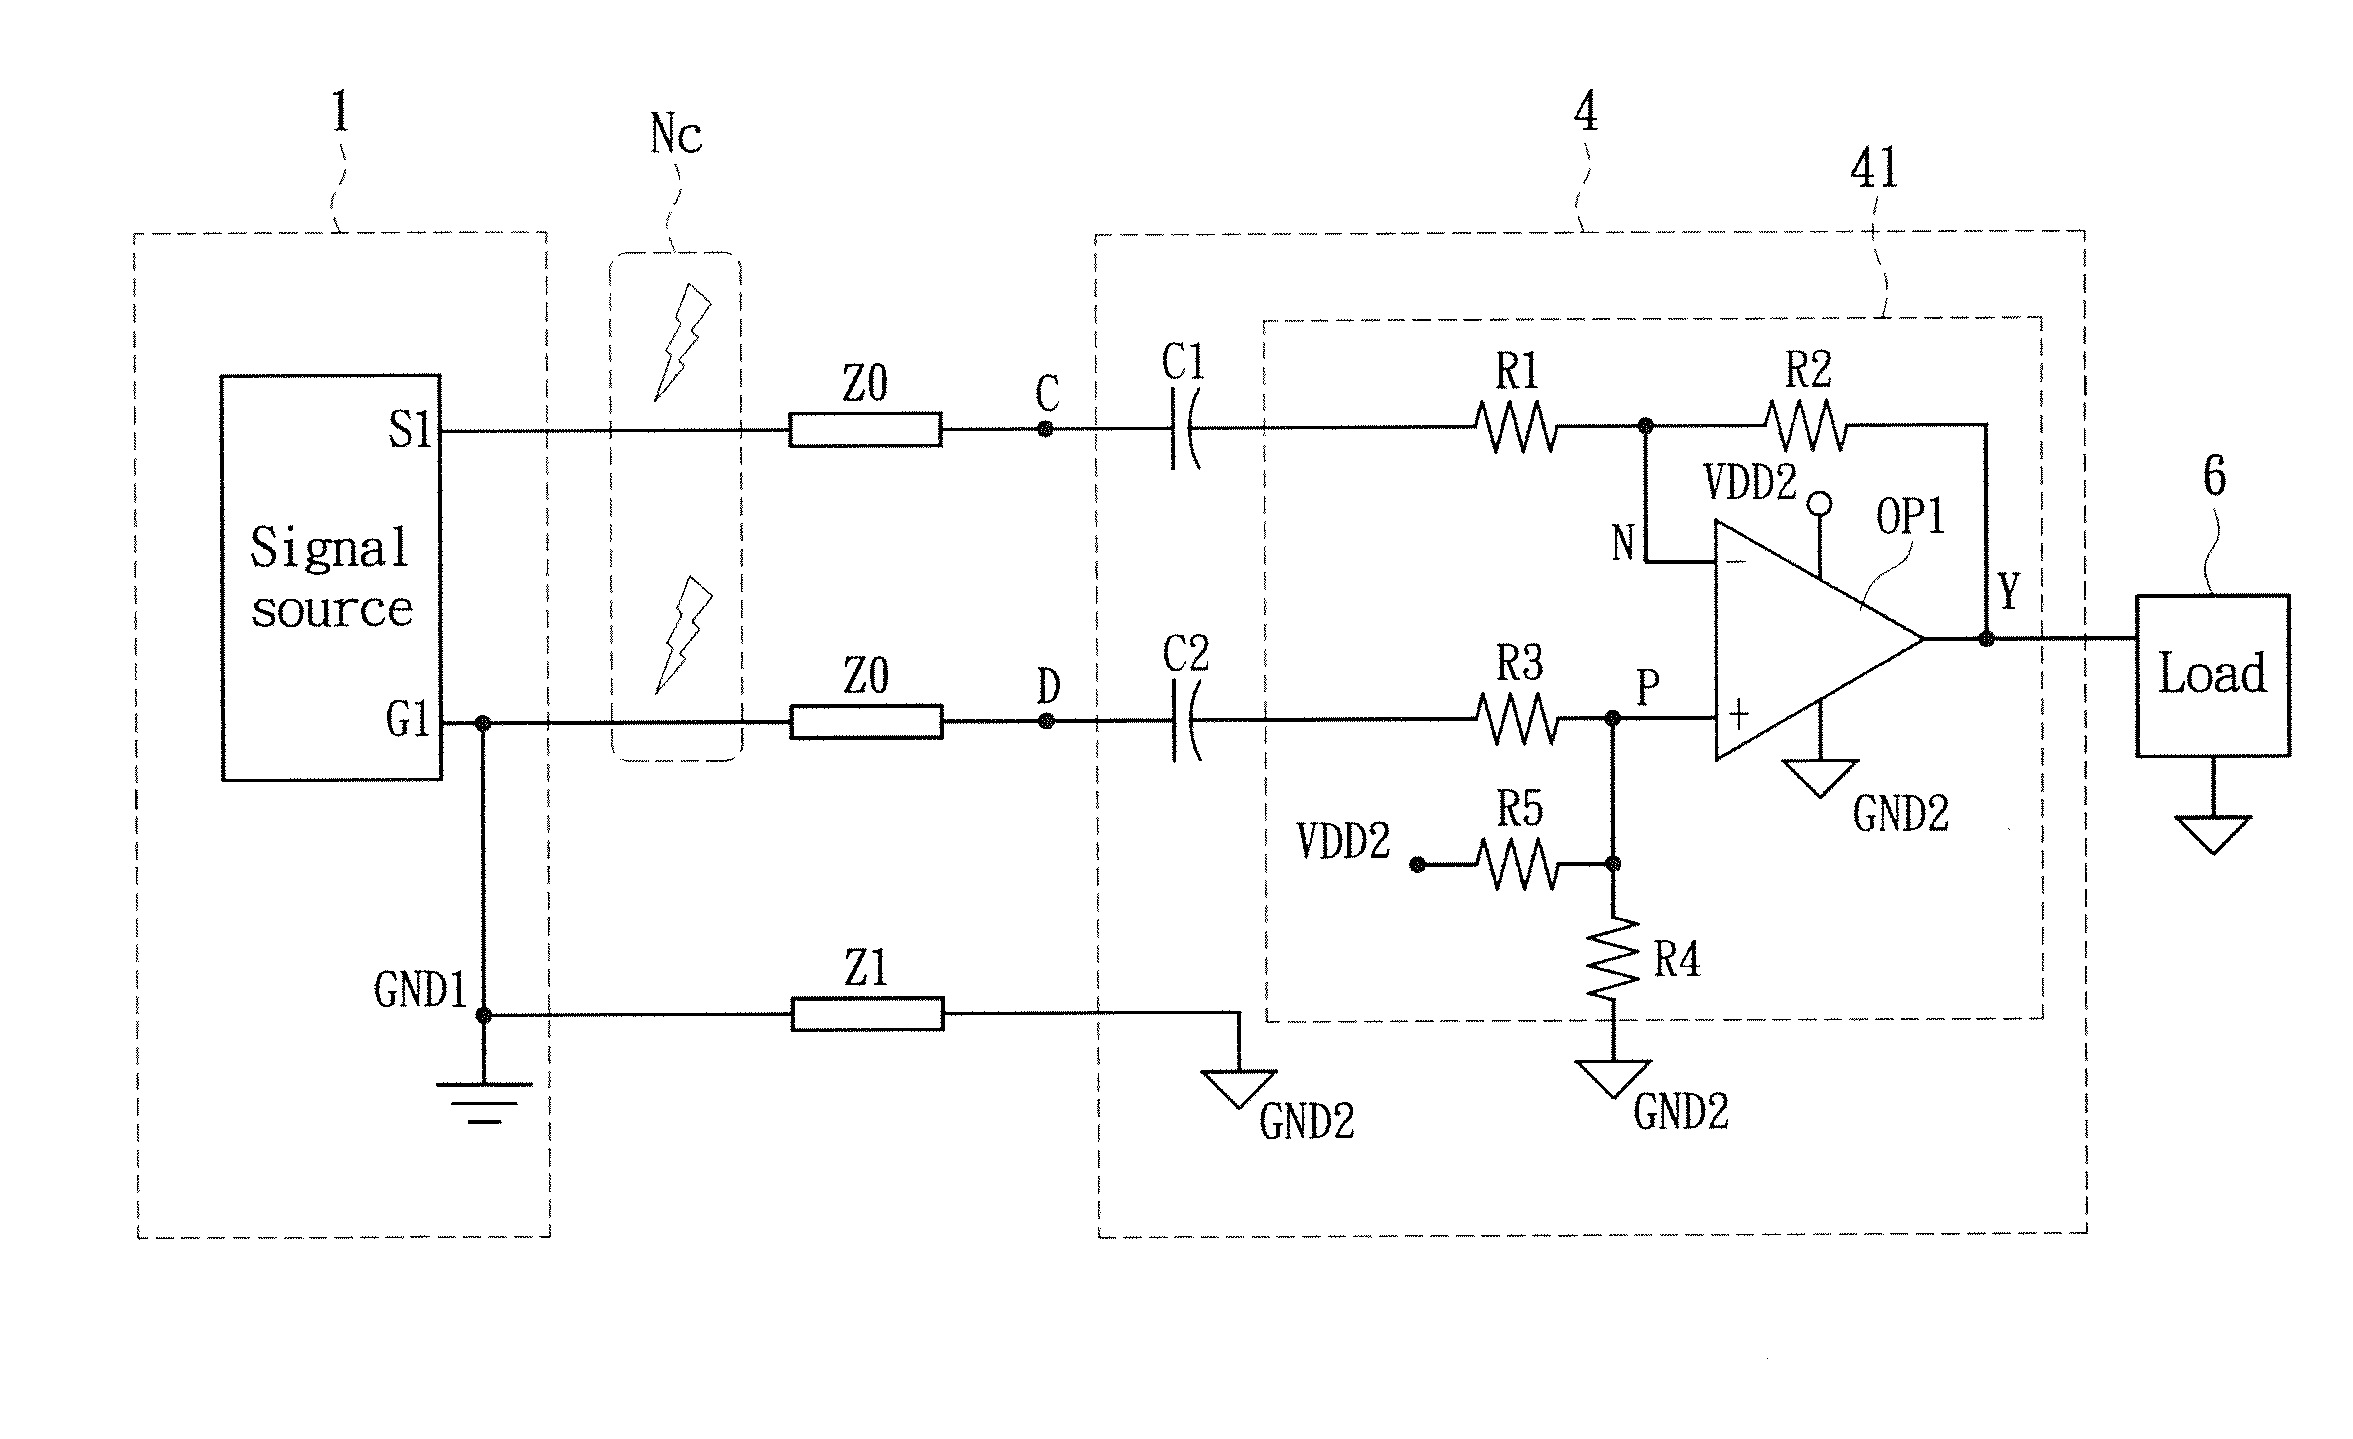 Common mode noise cancellation circuit for unbalanced signals